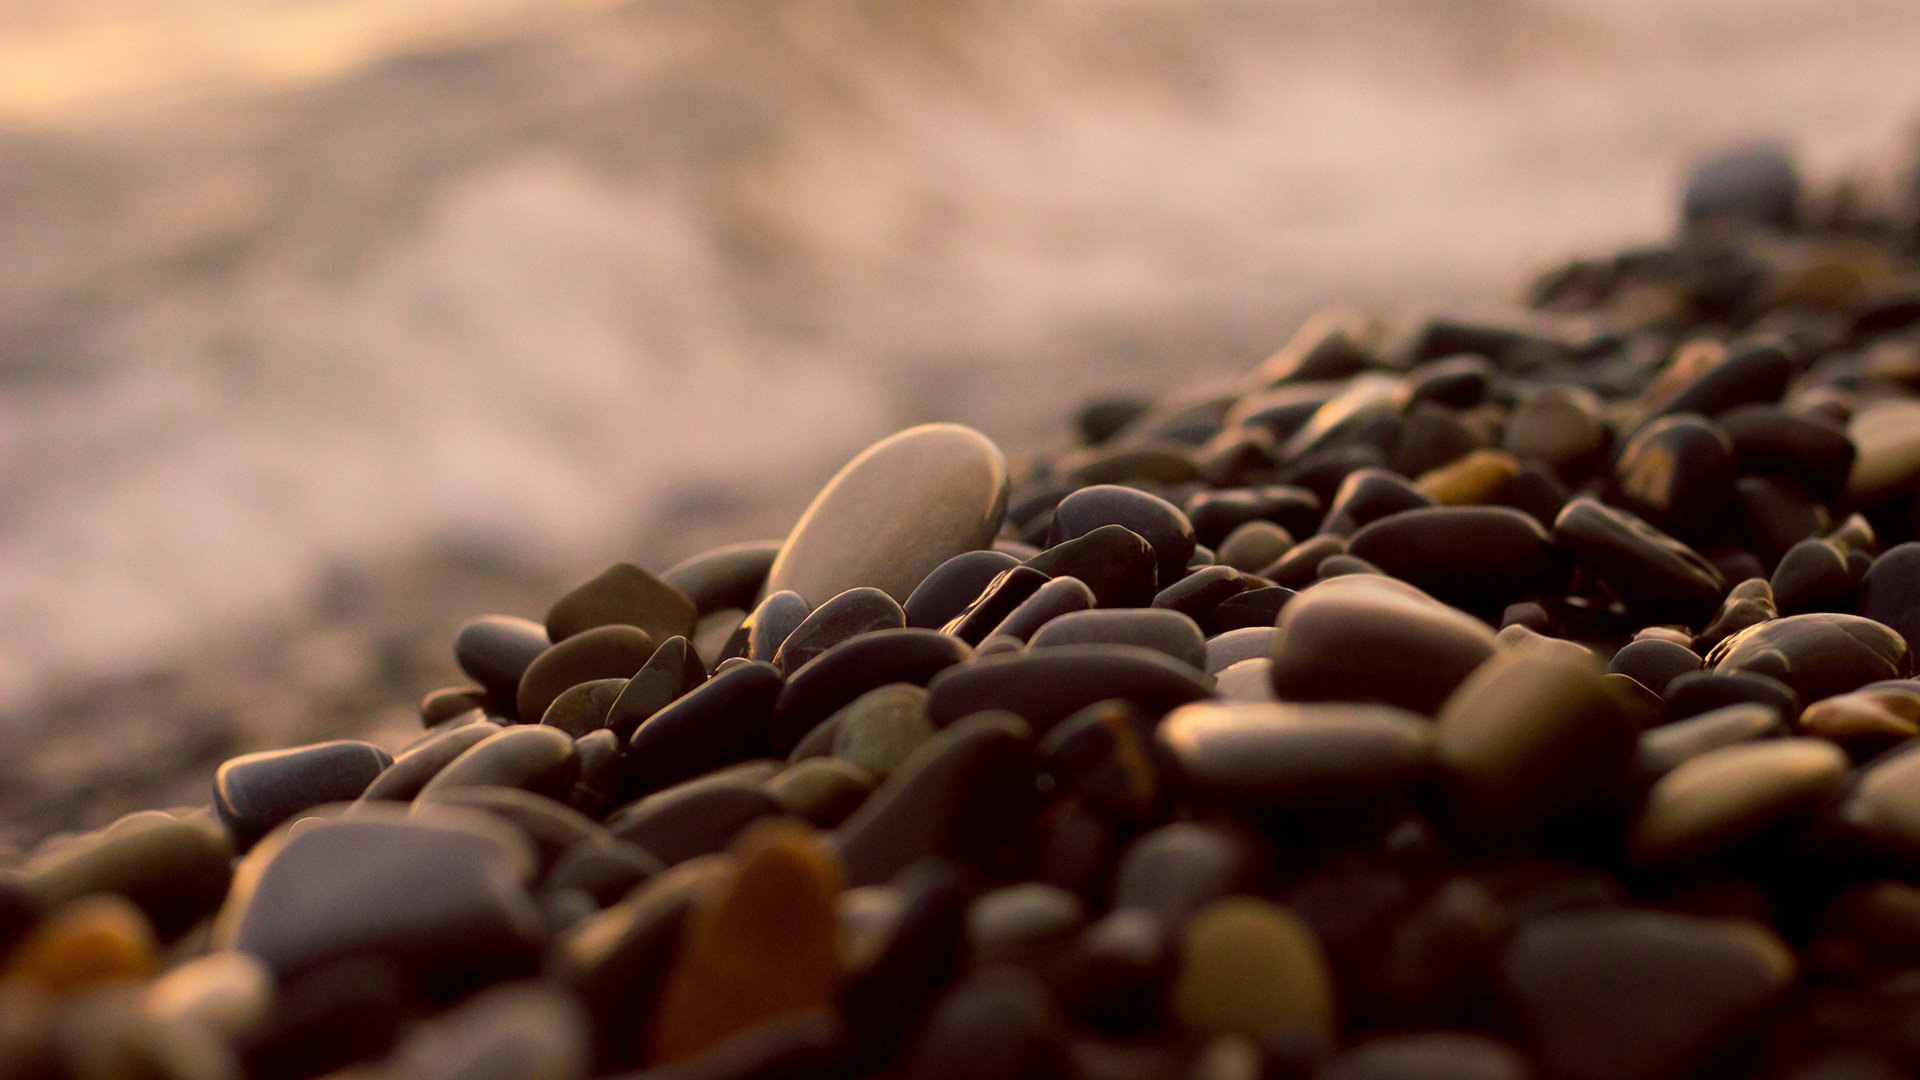 Nature Brown Photography Blurred Pebbles Natural Light Beach Stones 1920x1080